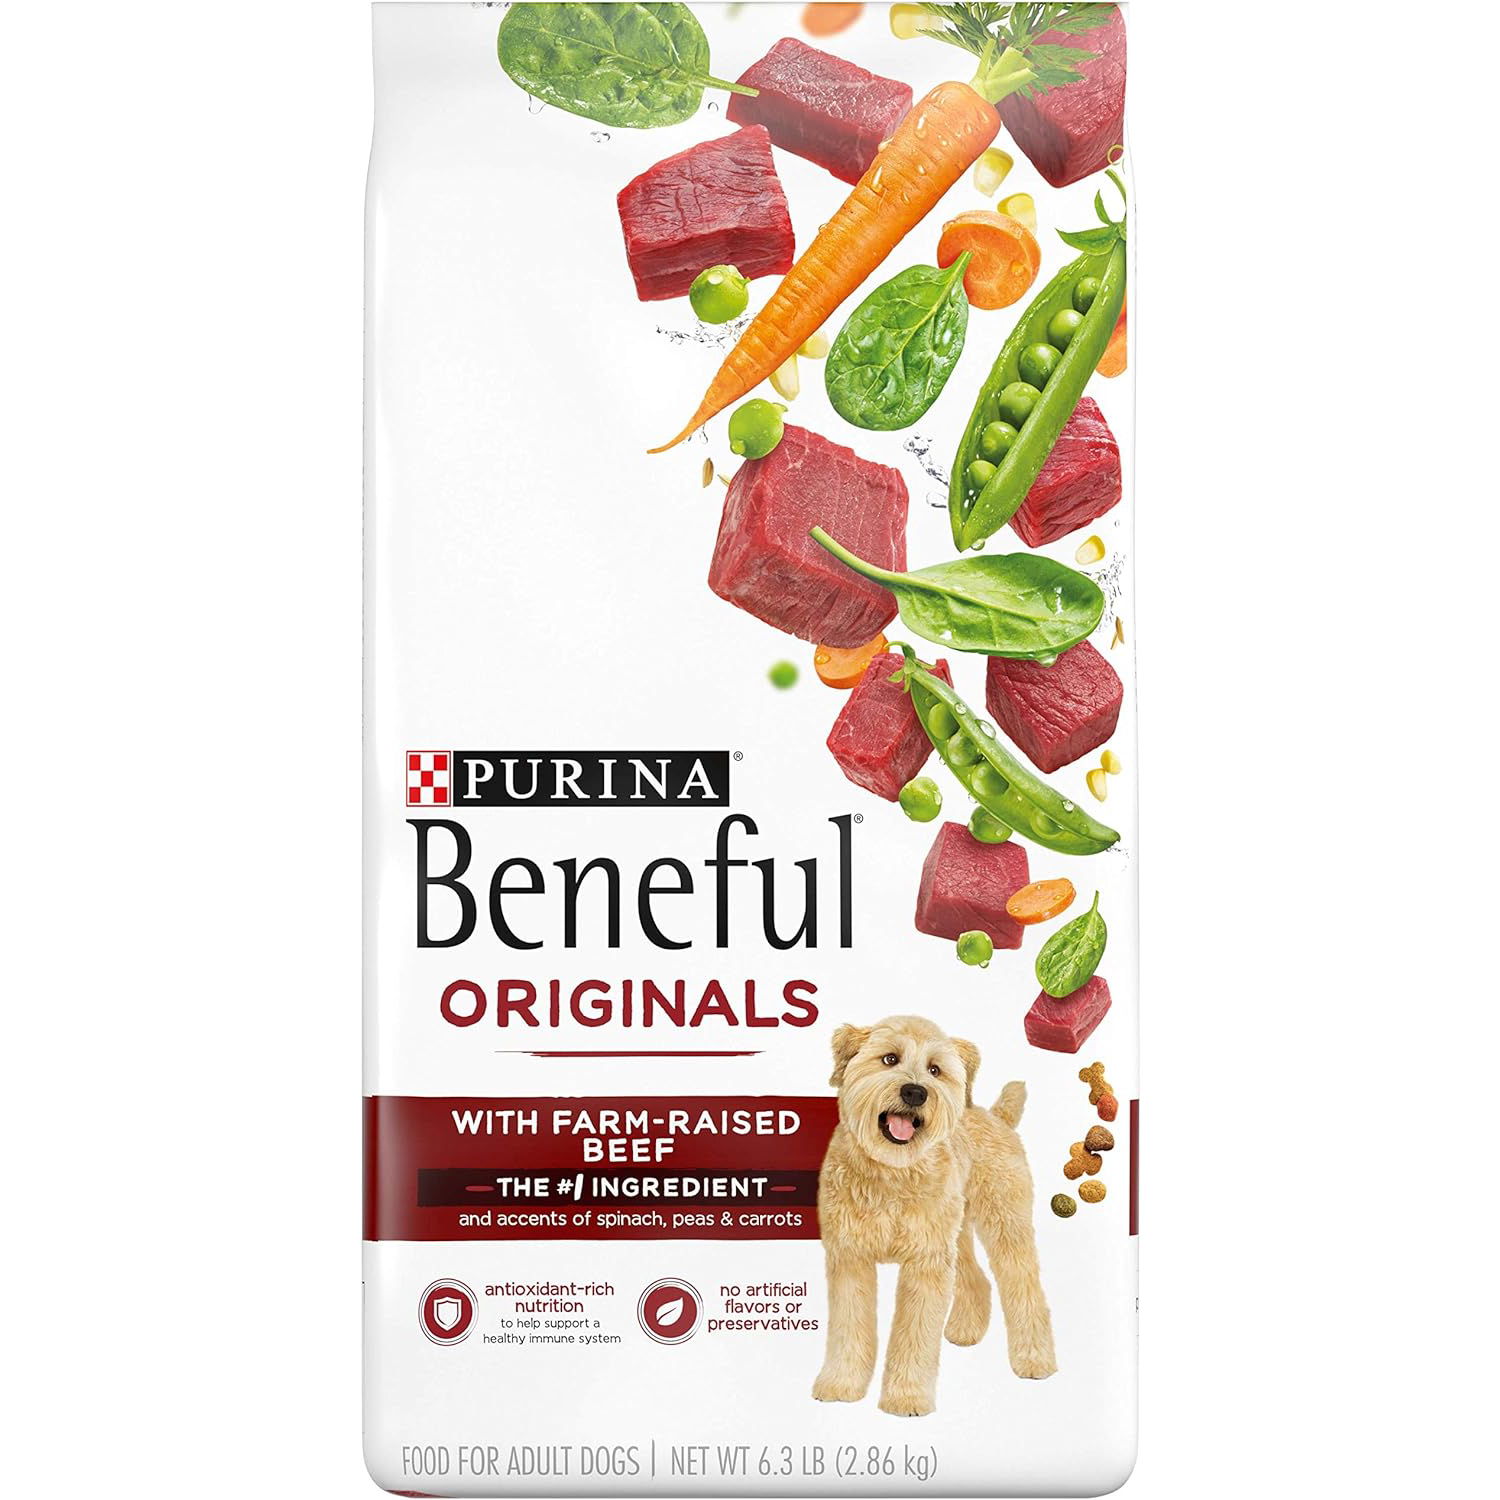 New Project Purina Beneful Originals With Farm-Raised Beef, With Real Meat Dog Food 